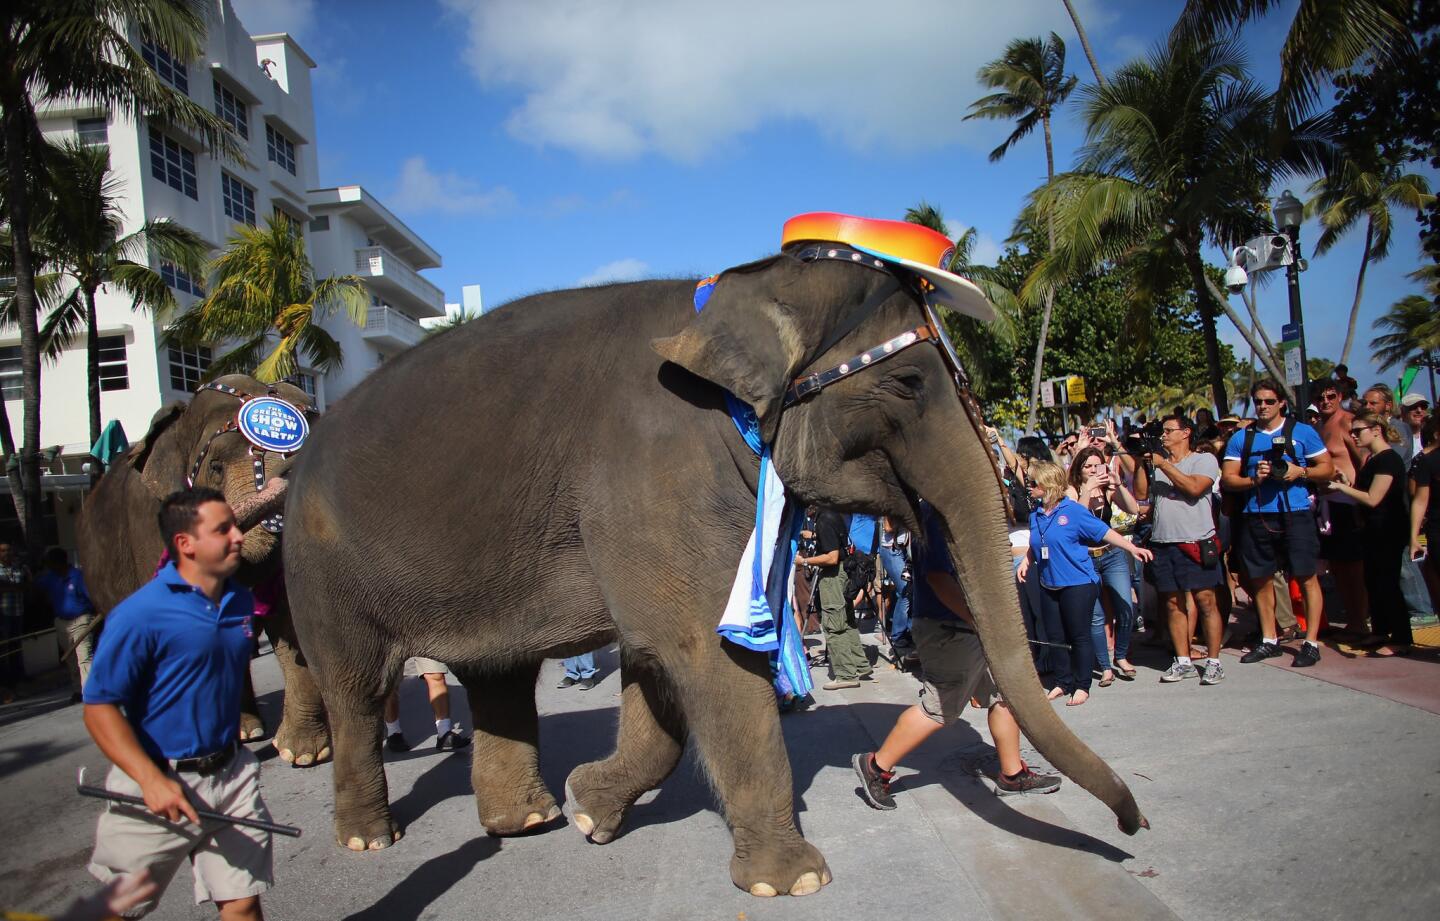 Elephants from the Ringling Bros. and Barnum & Bailey Circus parade along Ocean Drive on January 9, 2013 in Miami Beach, Florida.